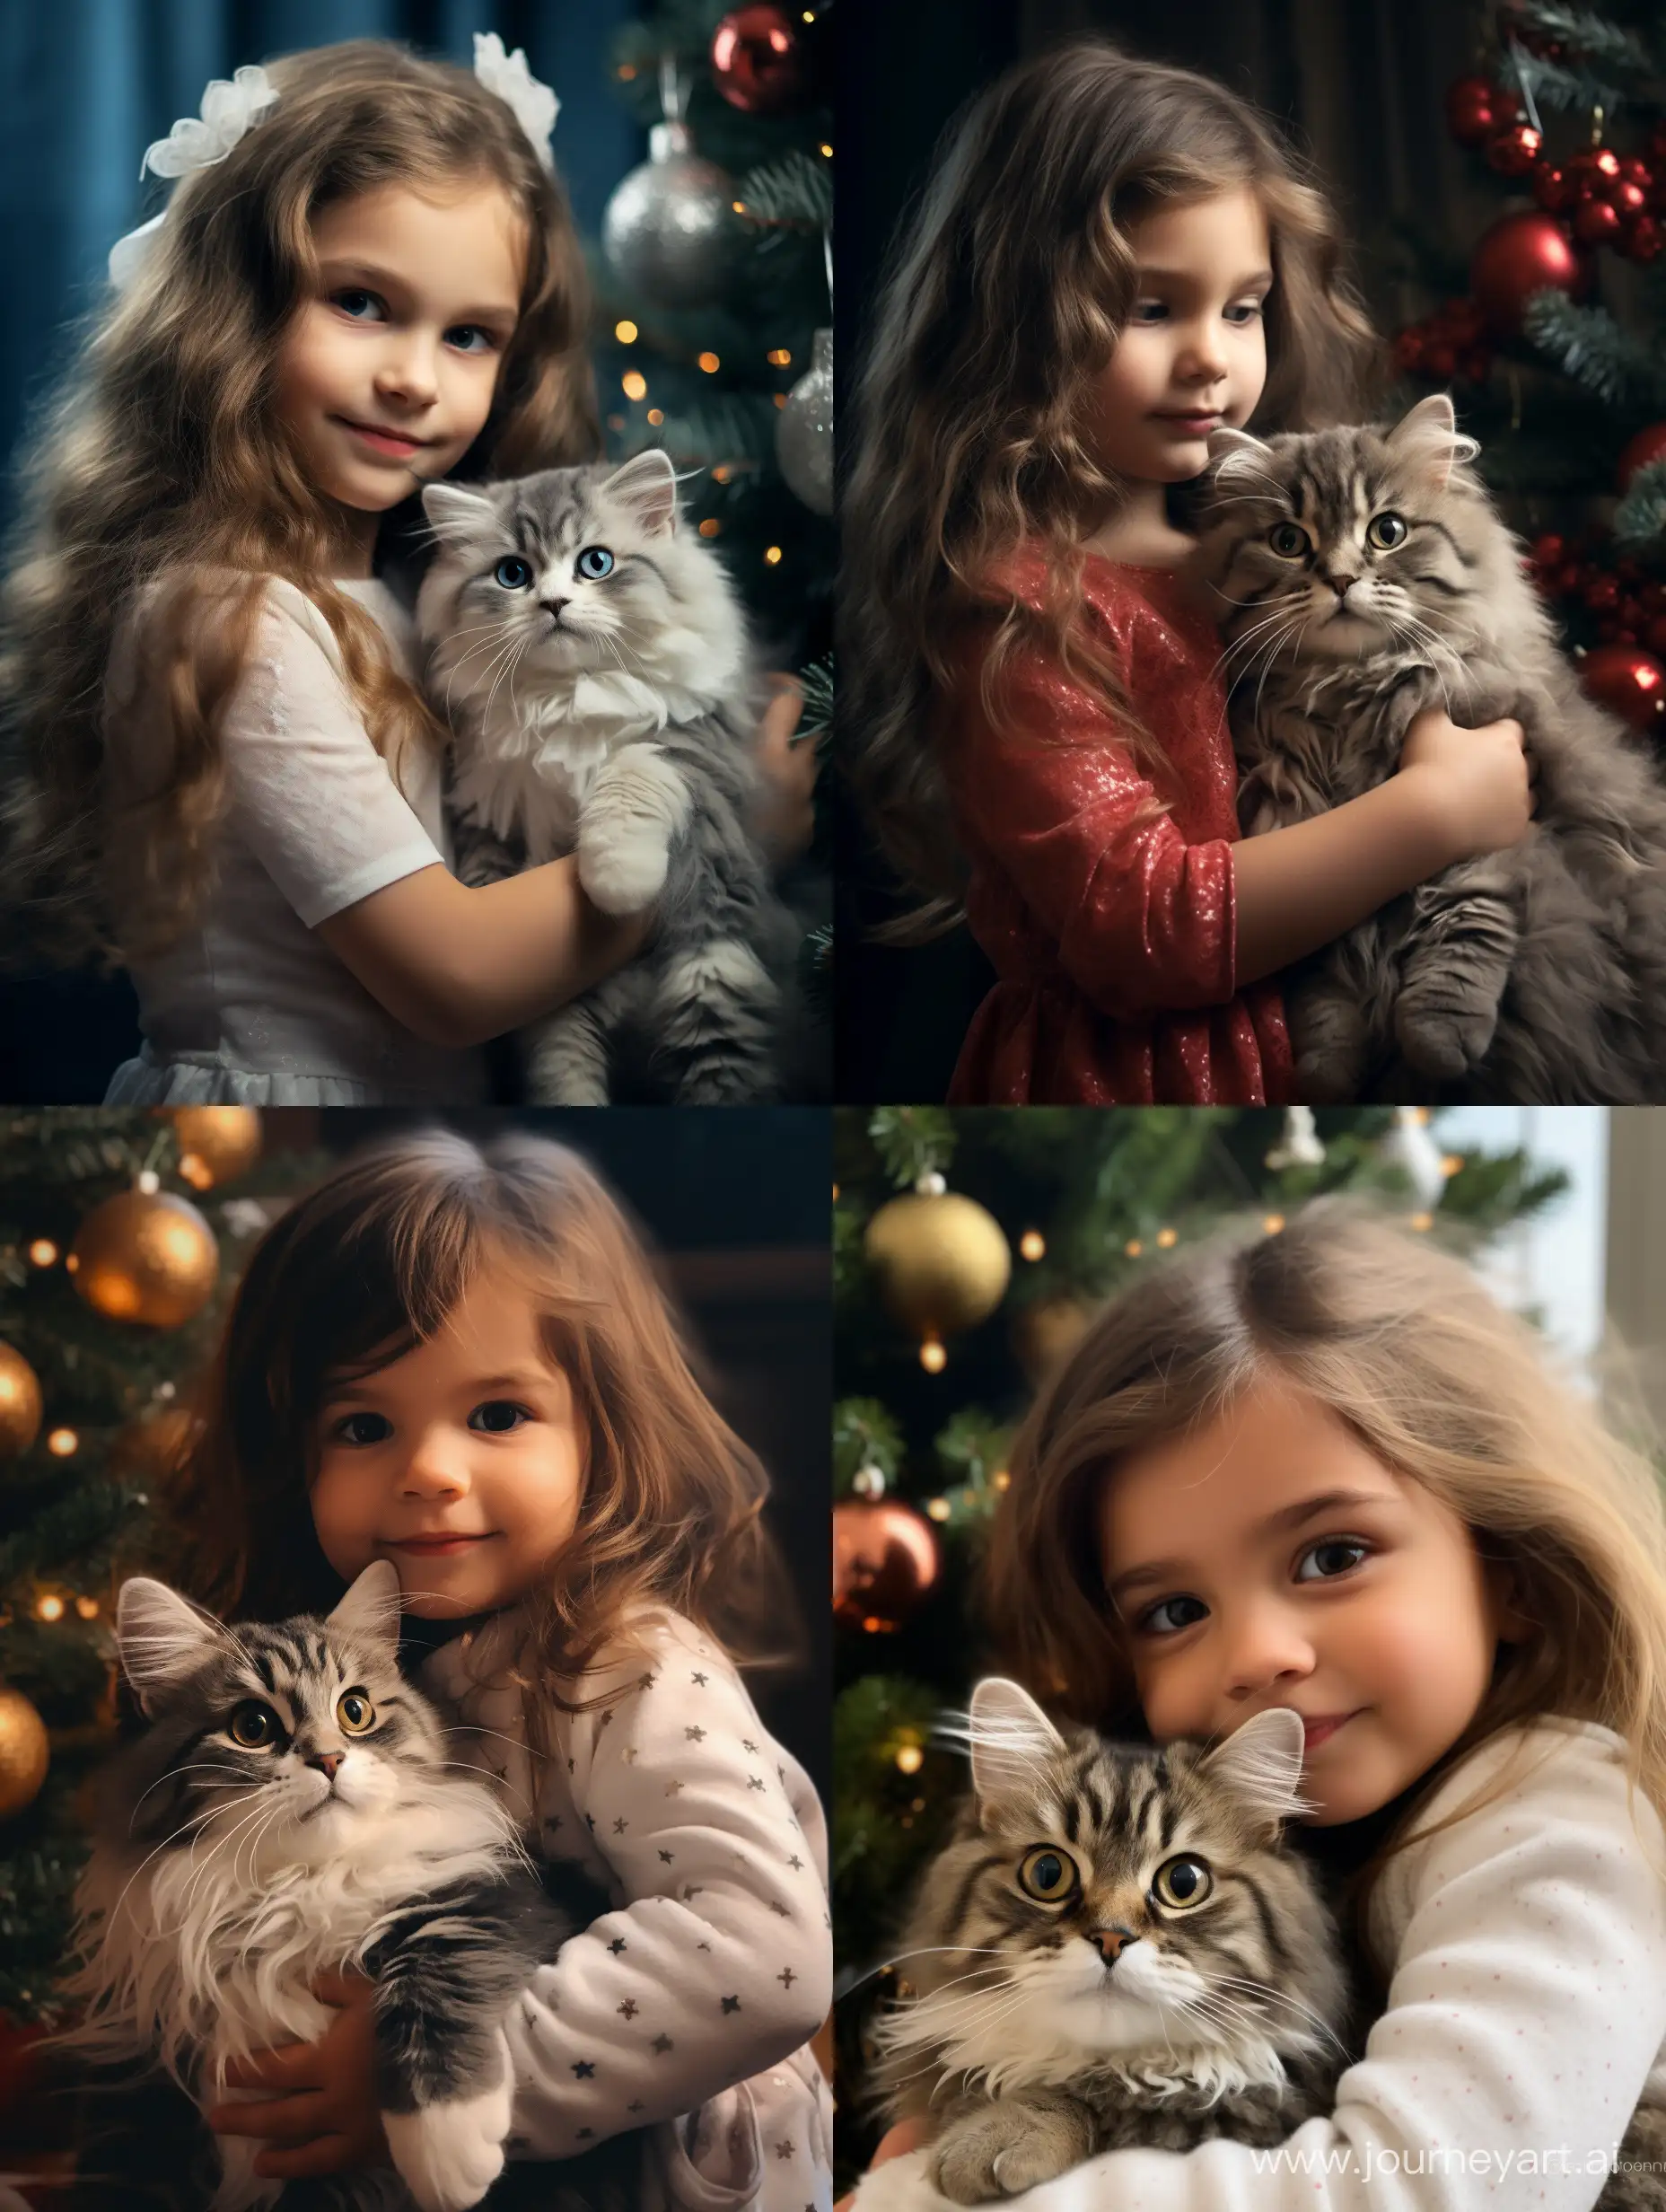 A little girl takes a cat in her arms near a Christmas tree
